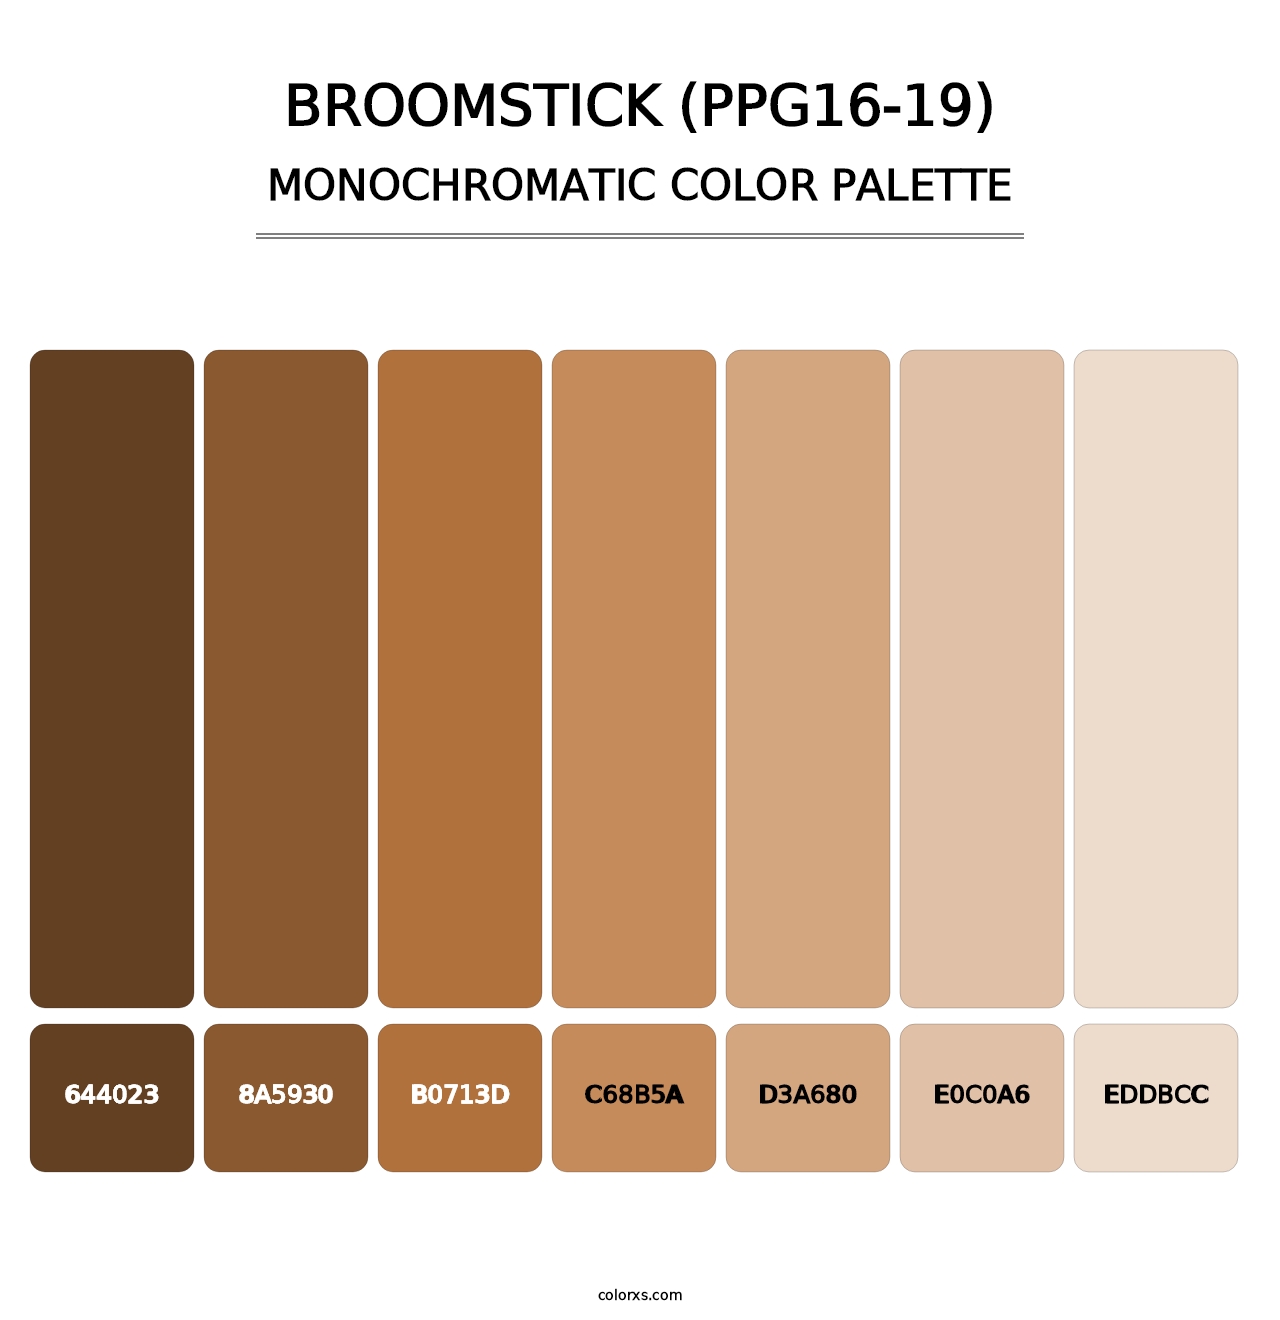 Broomstick (PPG16-19) - Monochromatic Color Palette